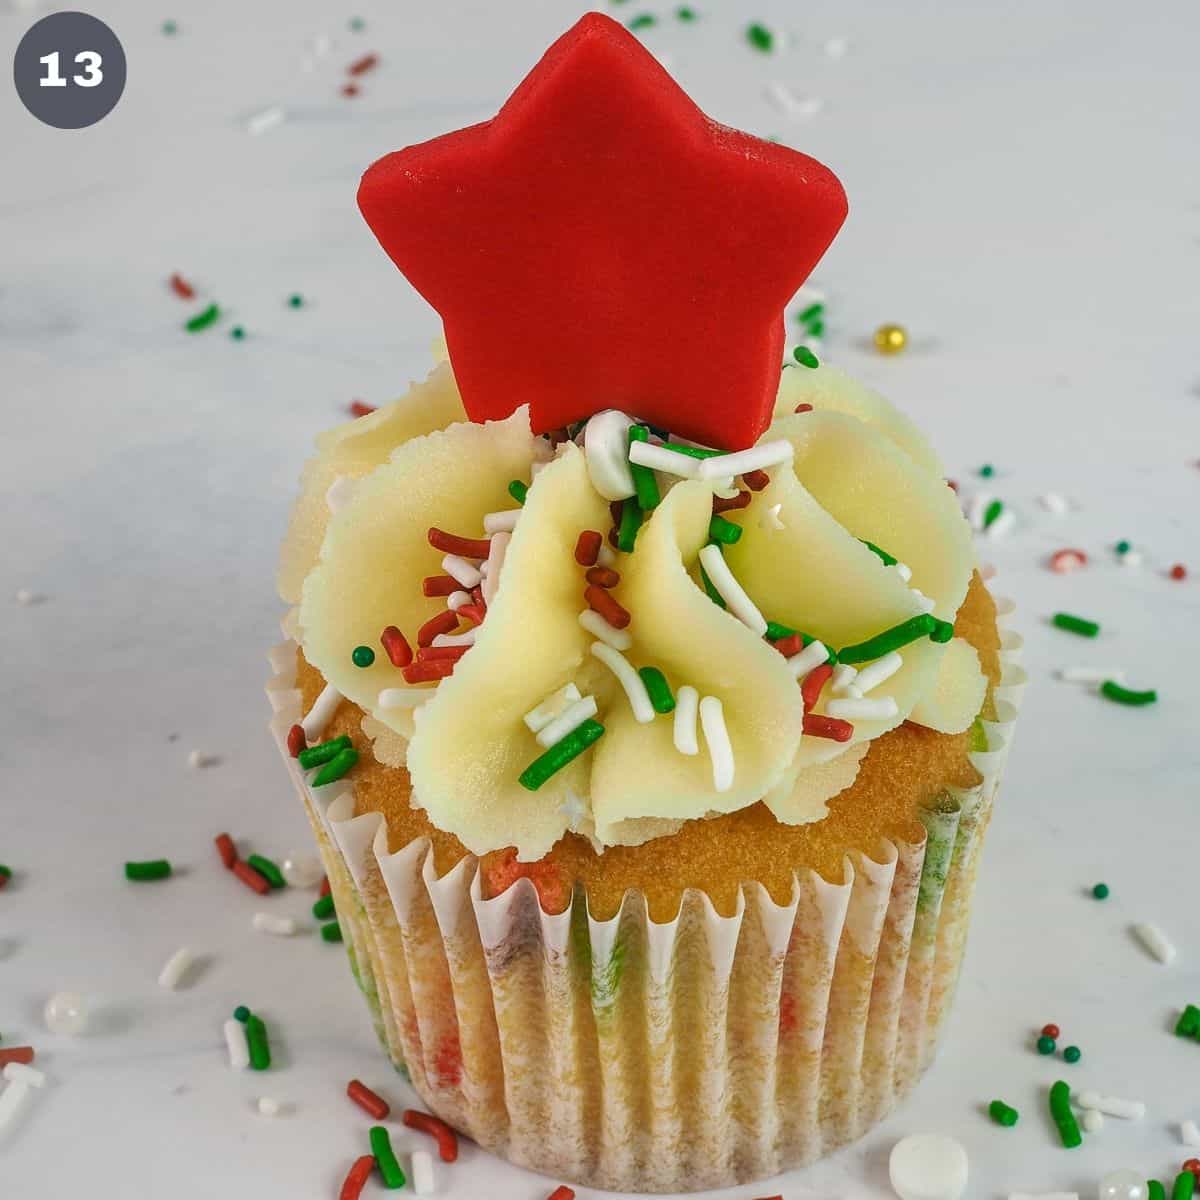 A cupcake with red star topper and sprinkles.